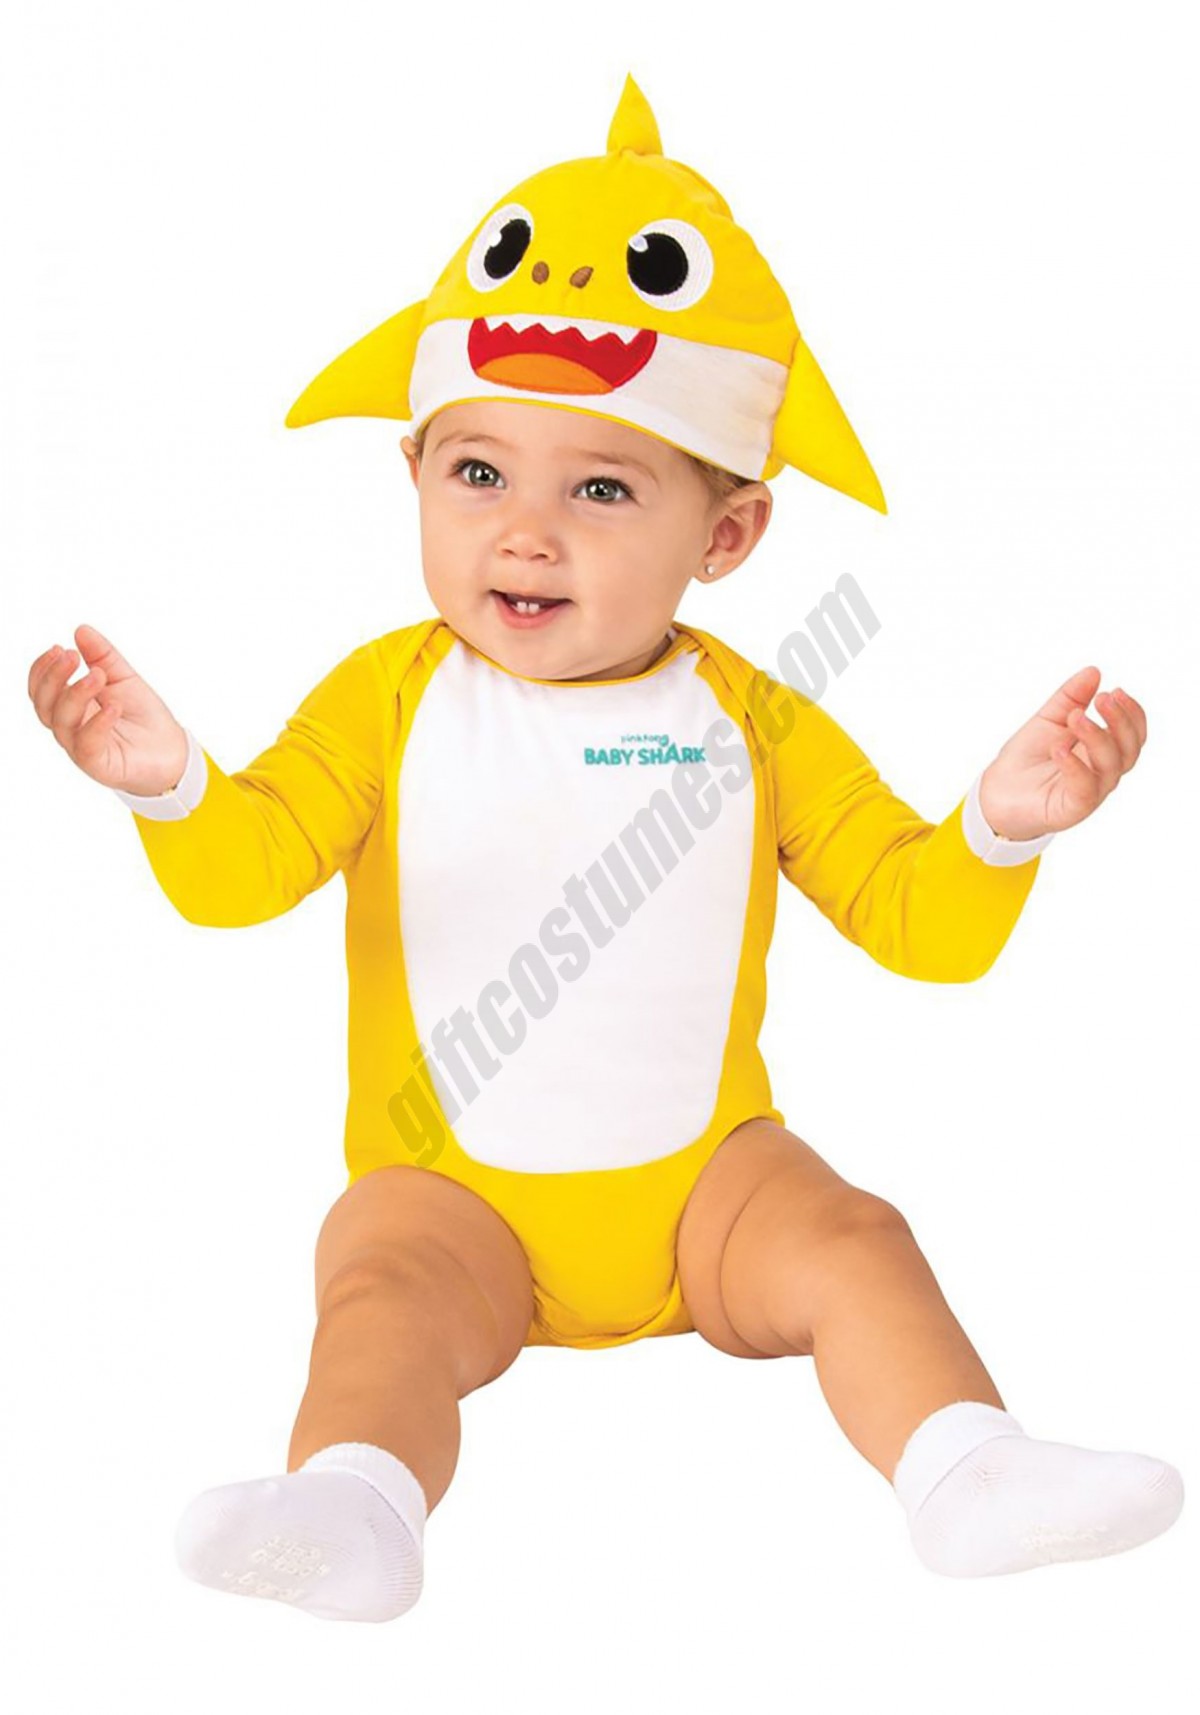 Baby Shark Costume for Infants Promotions - -0